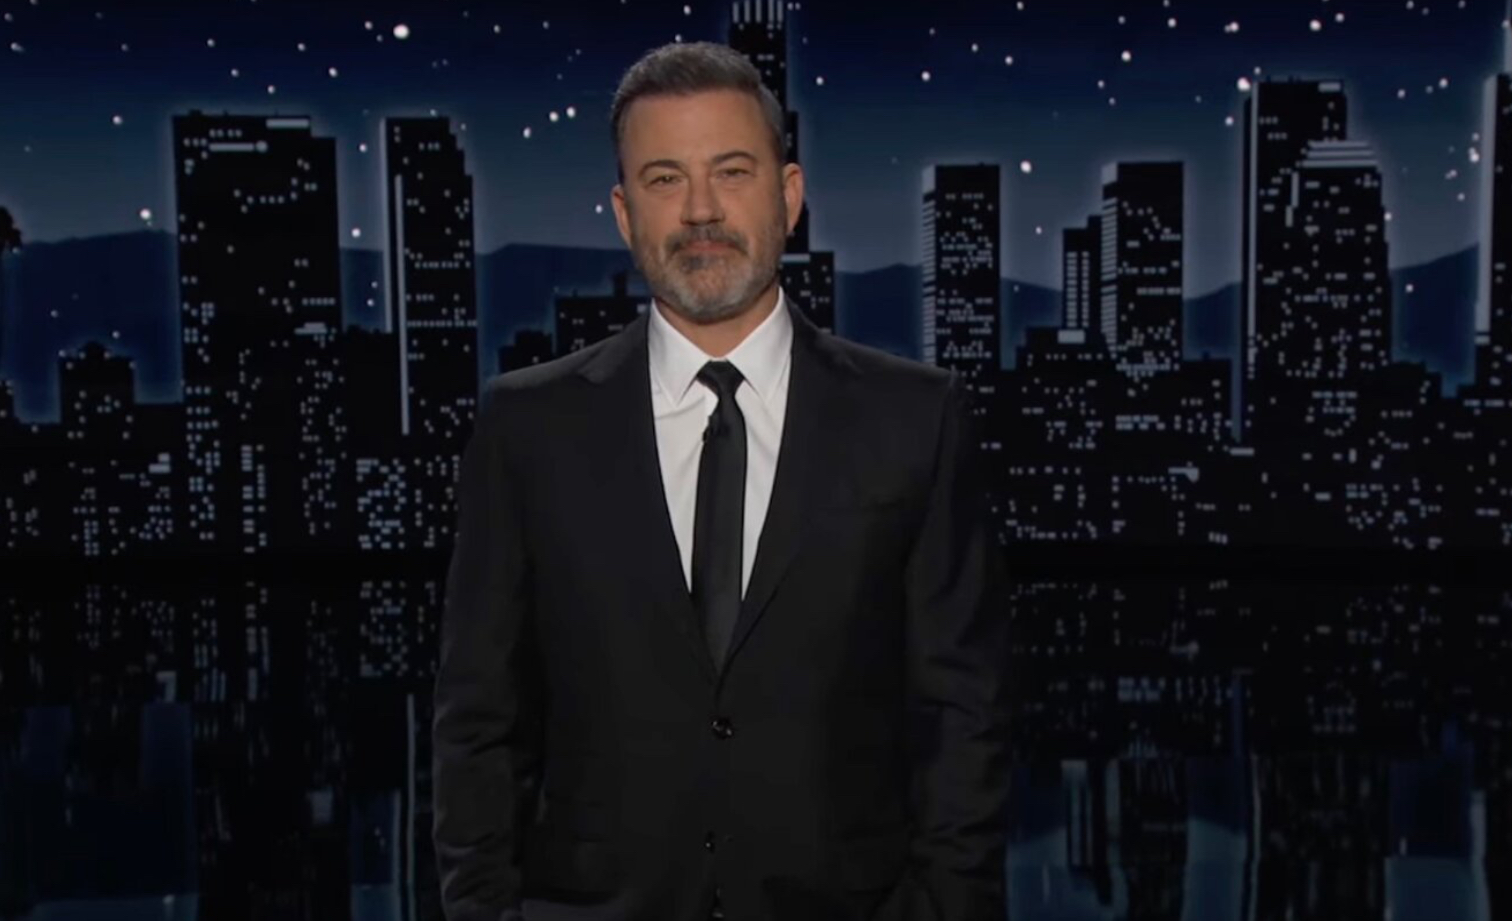 A Deeper Look into Jimmy Kimmel Families and the “Same Letter Effect”